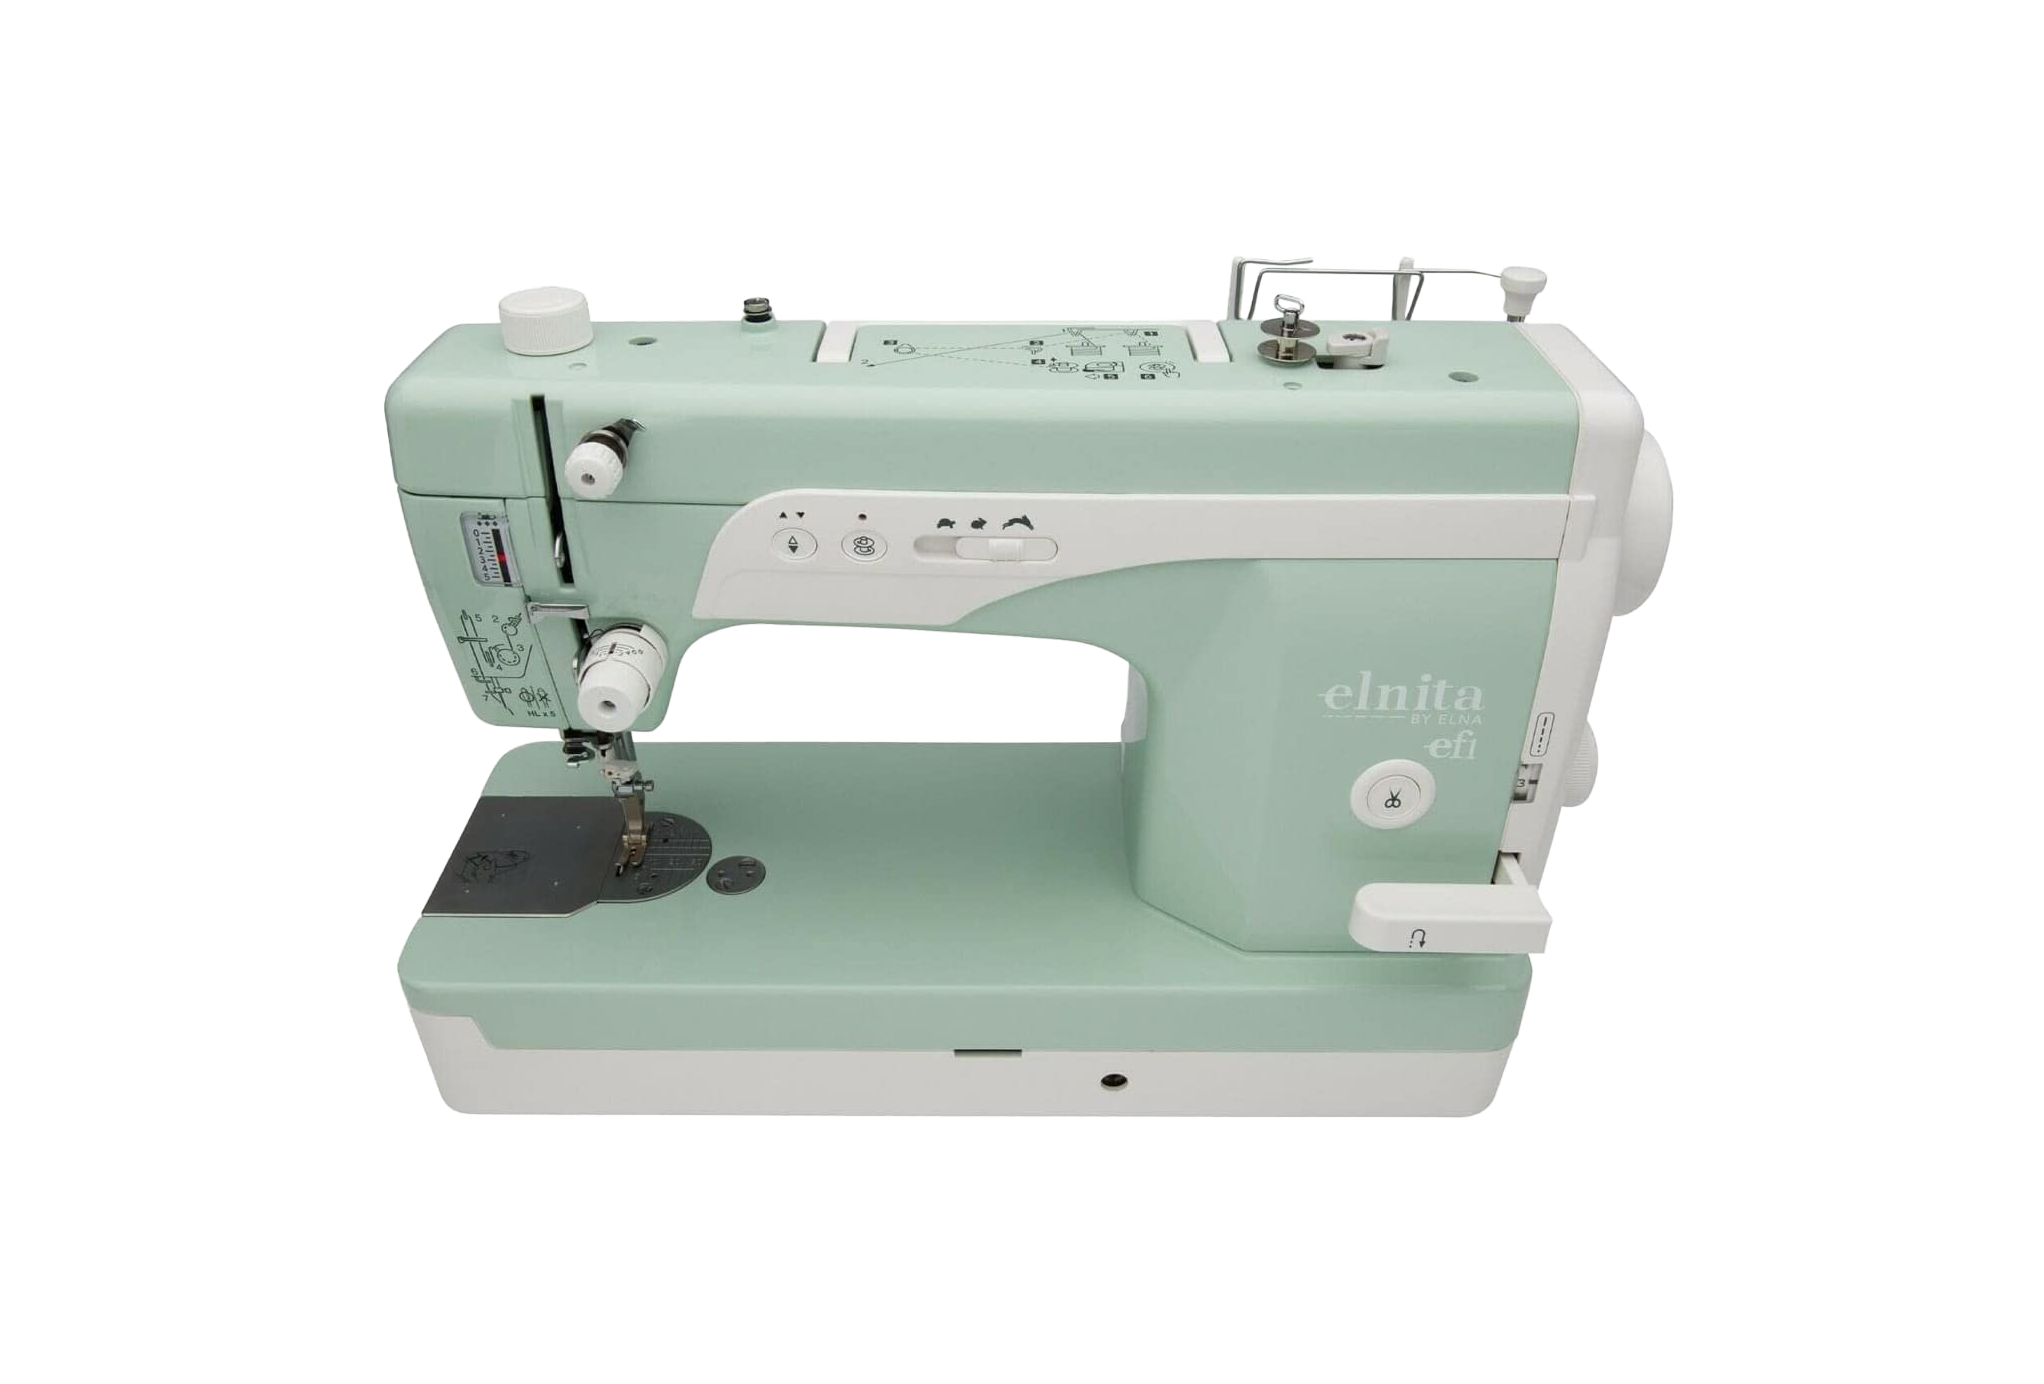 Elna Elnita EF1 Sewing and Quilting Machine for Sale at World Weidner